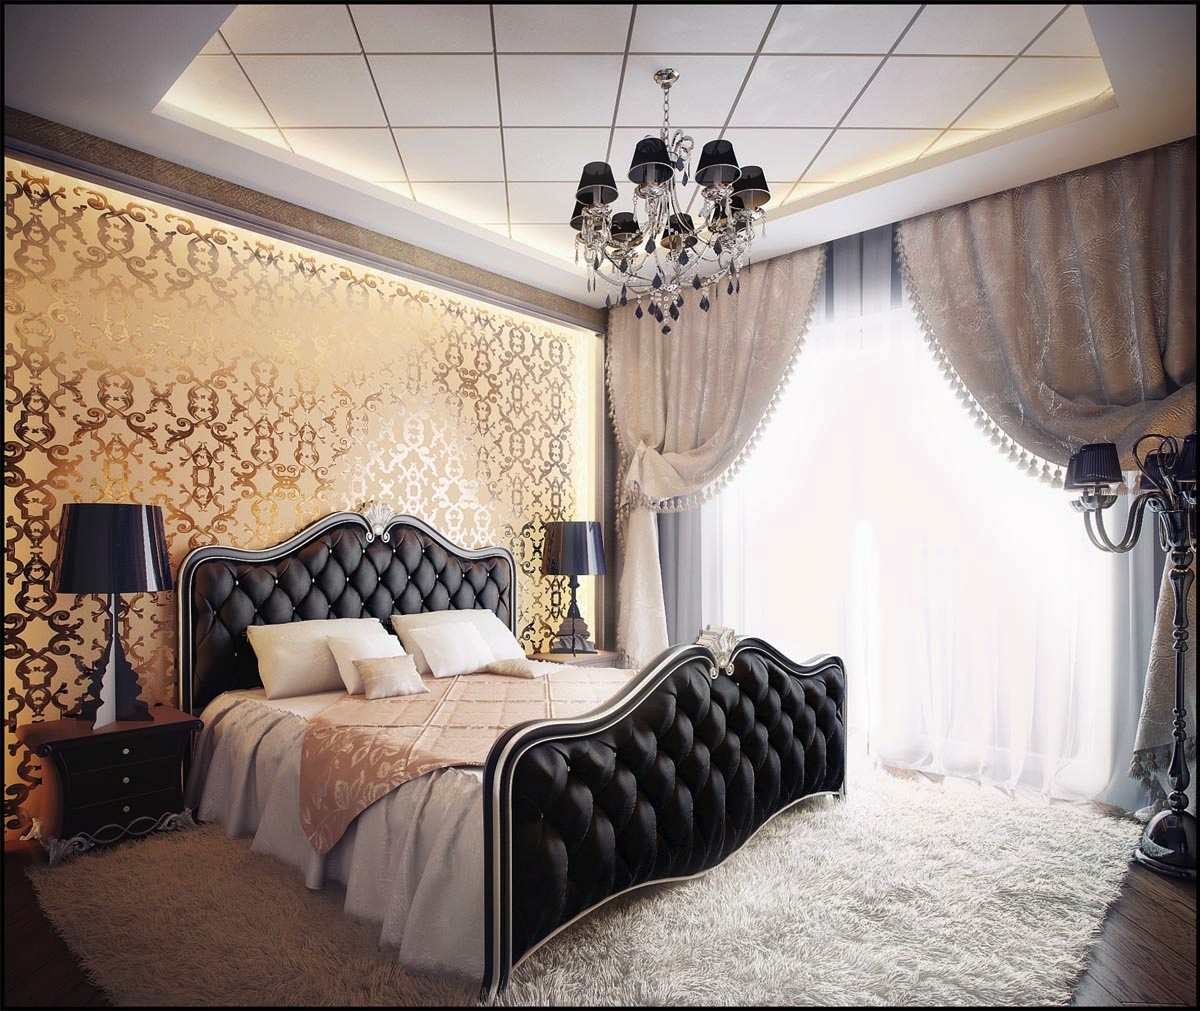 Timeless Beauty: Classic and Elegant Bedroom Decor